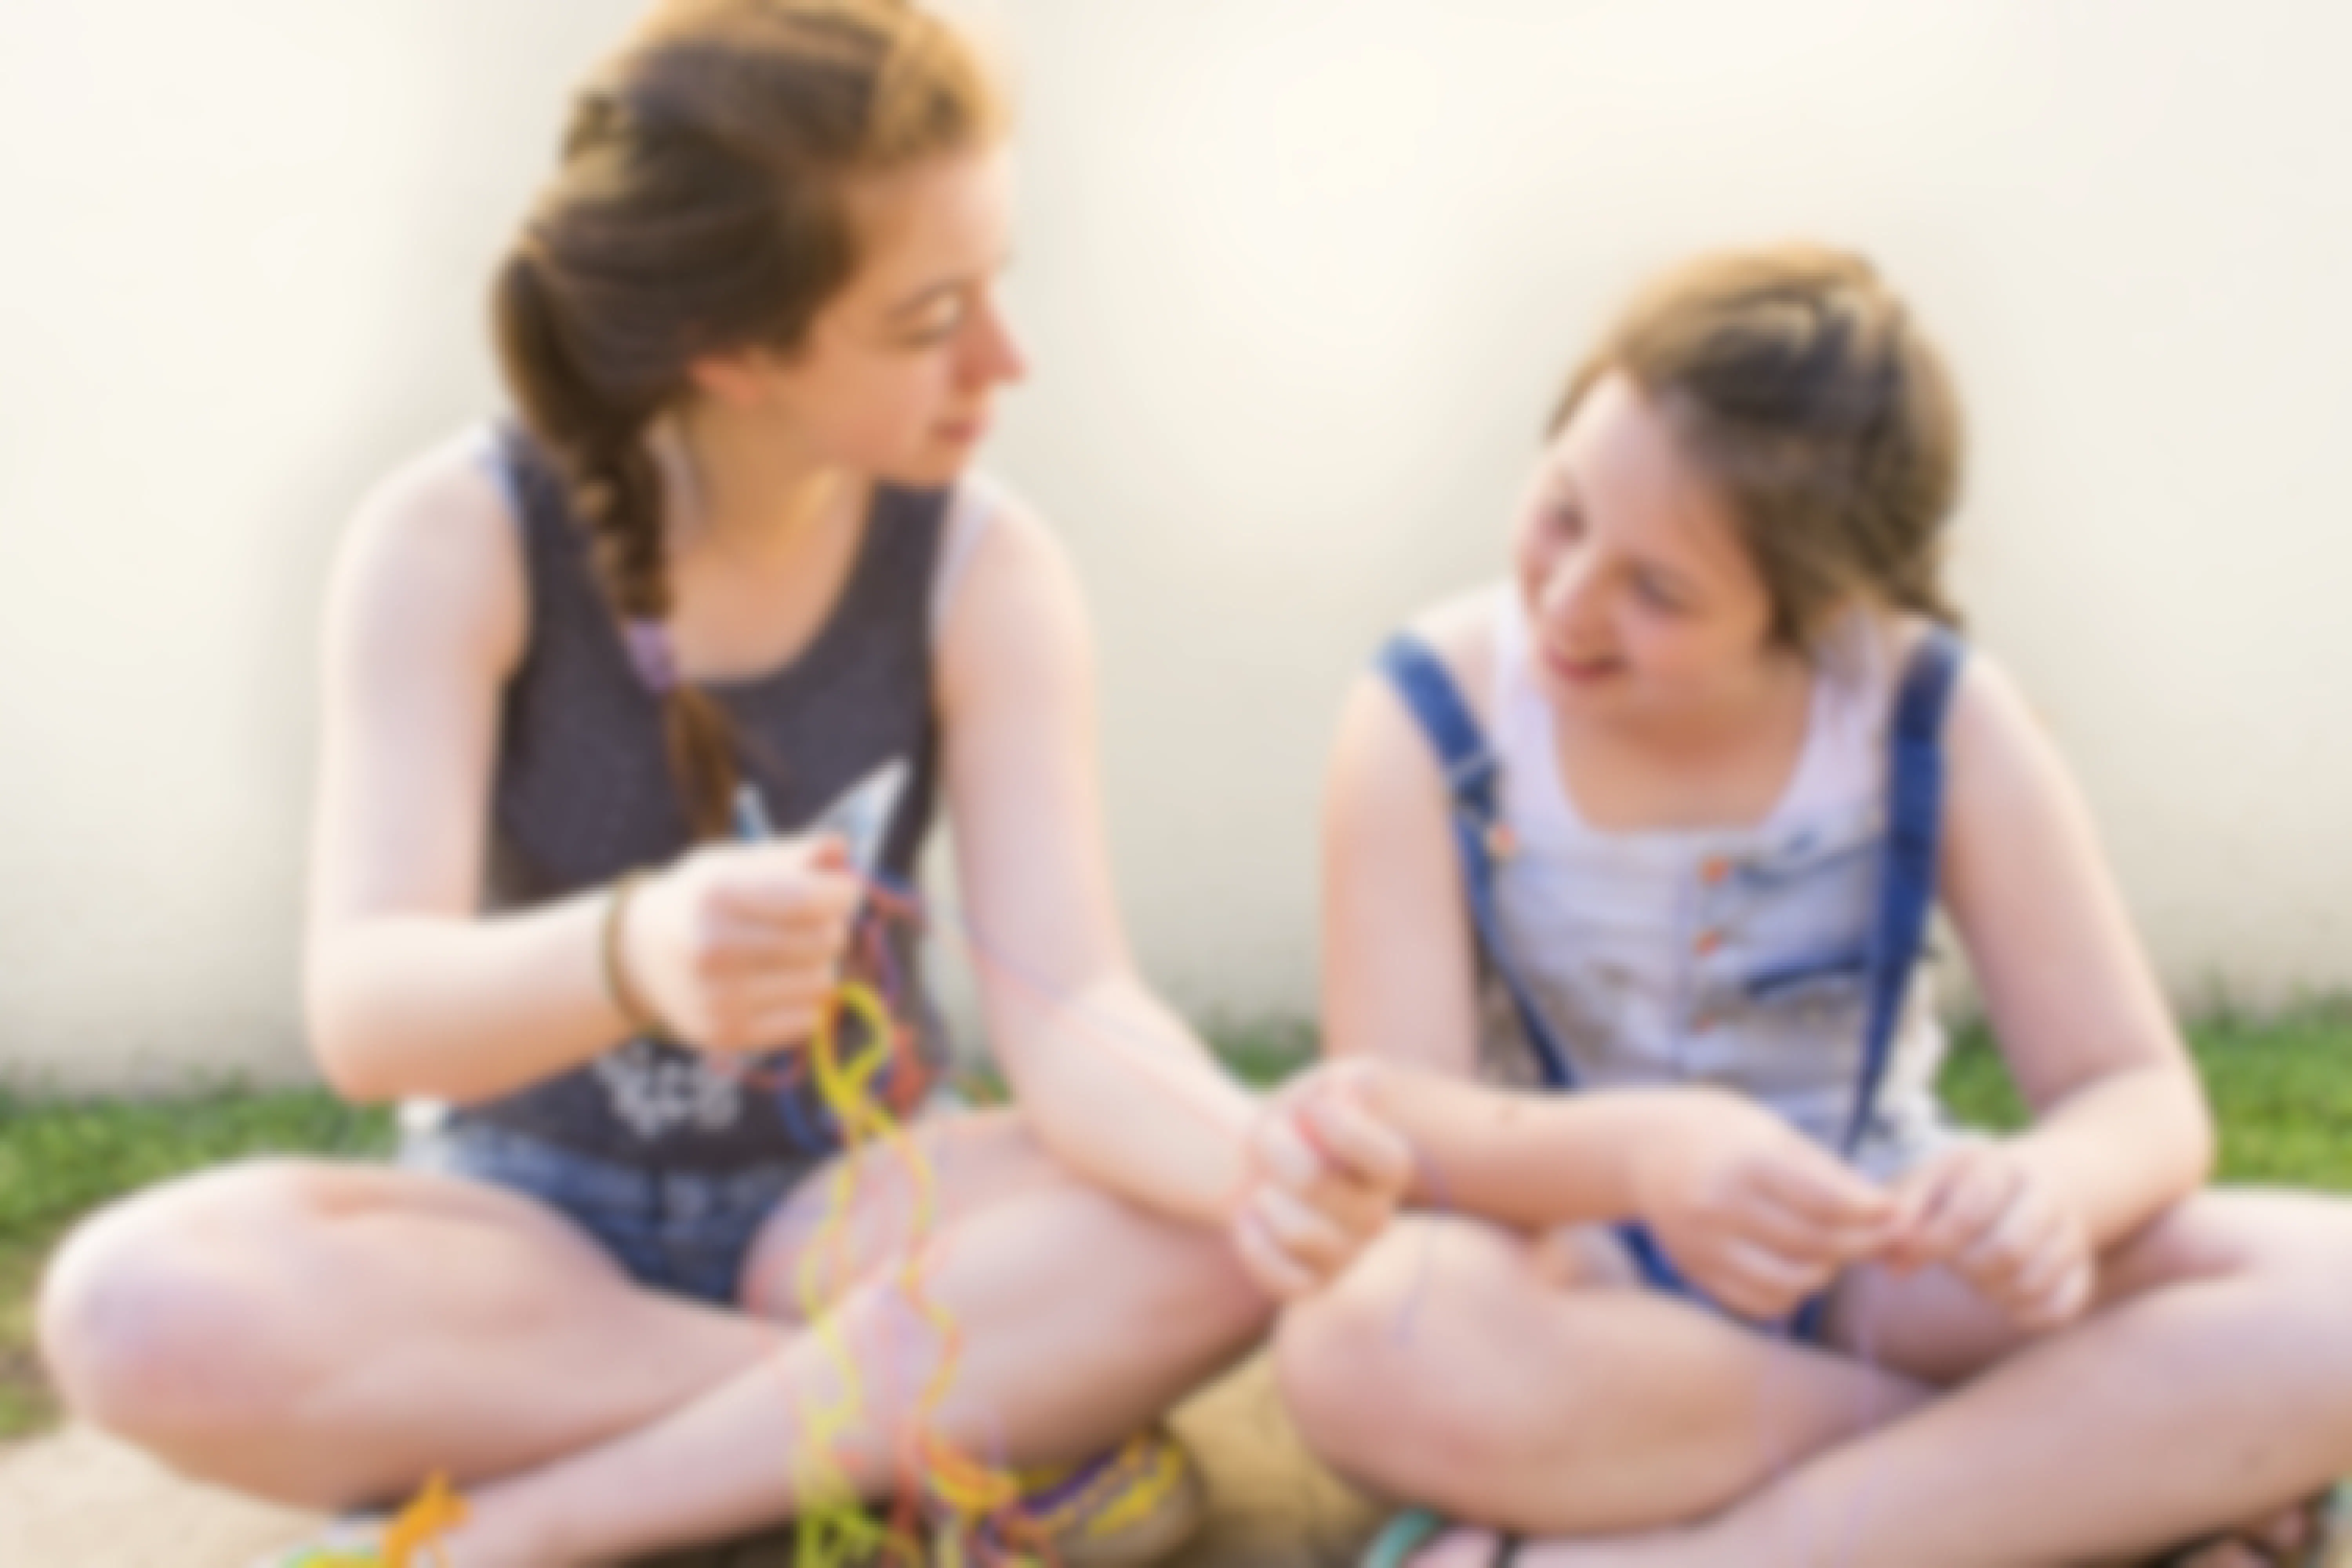 Two young girls sitting outside and working on making friendship bracelets with embroidery floss.